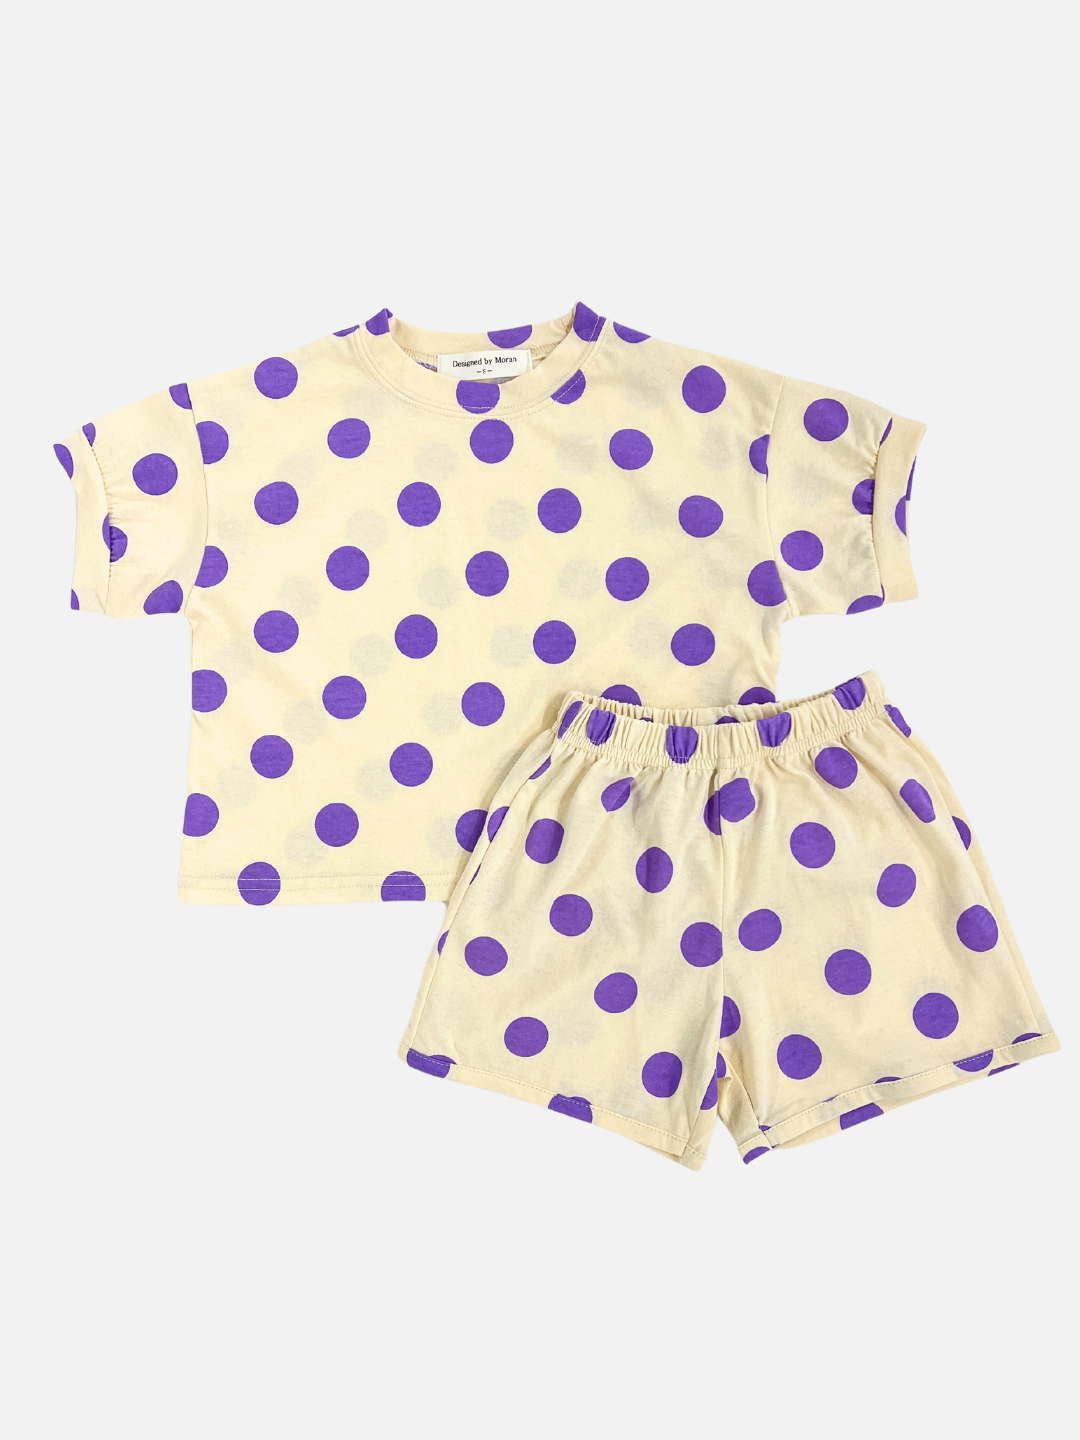 Purple |  A kids' tee shirt and shorts set in a pattern of purple dots on an ecru background